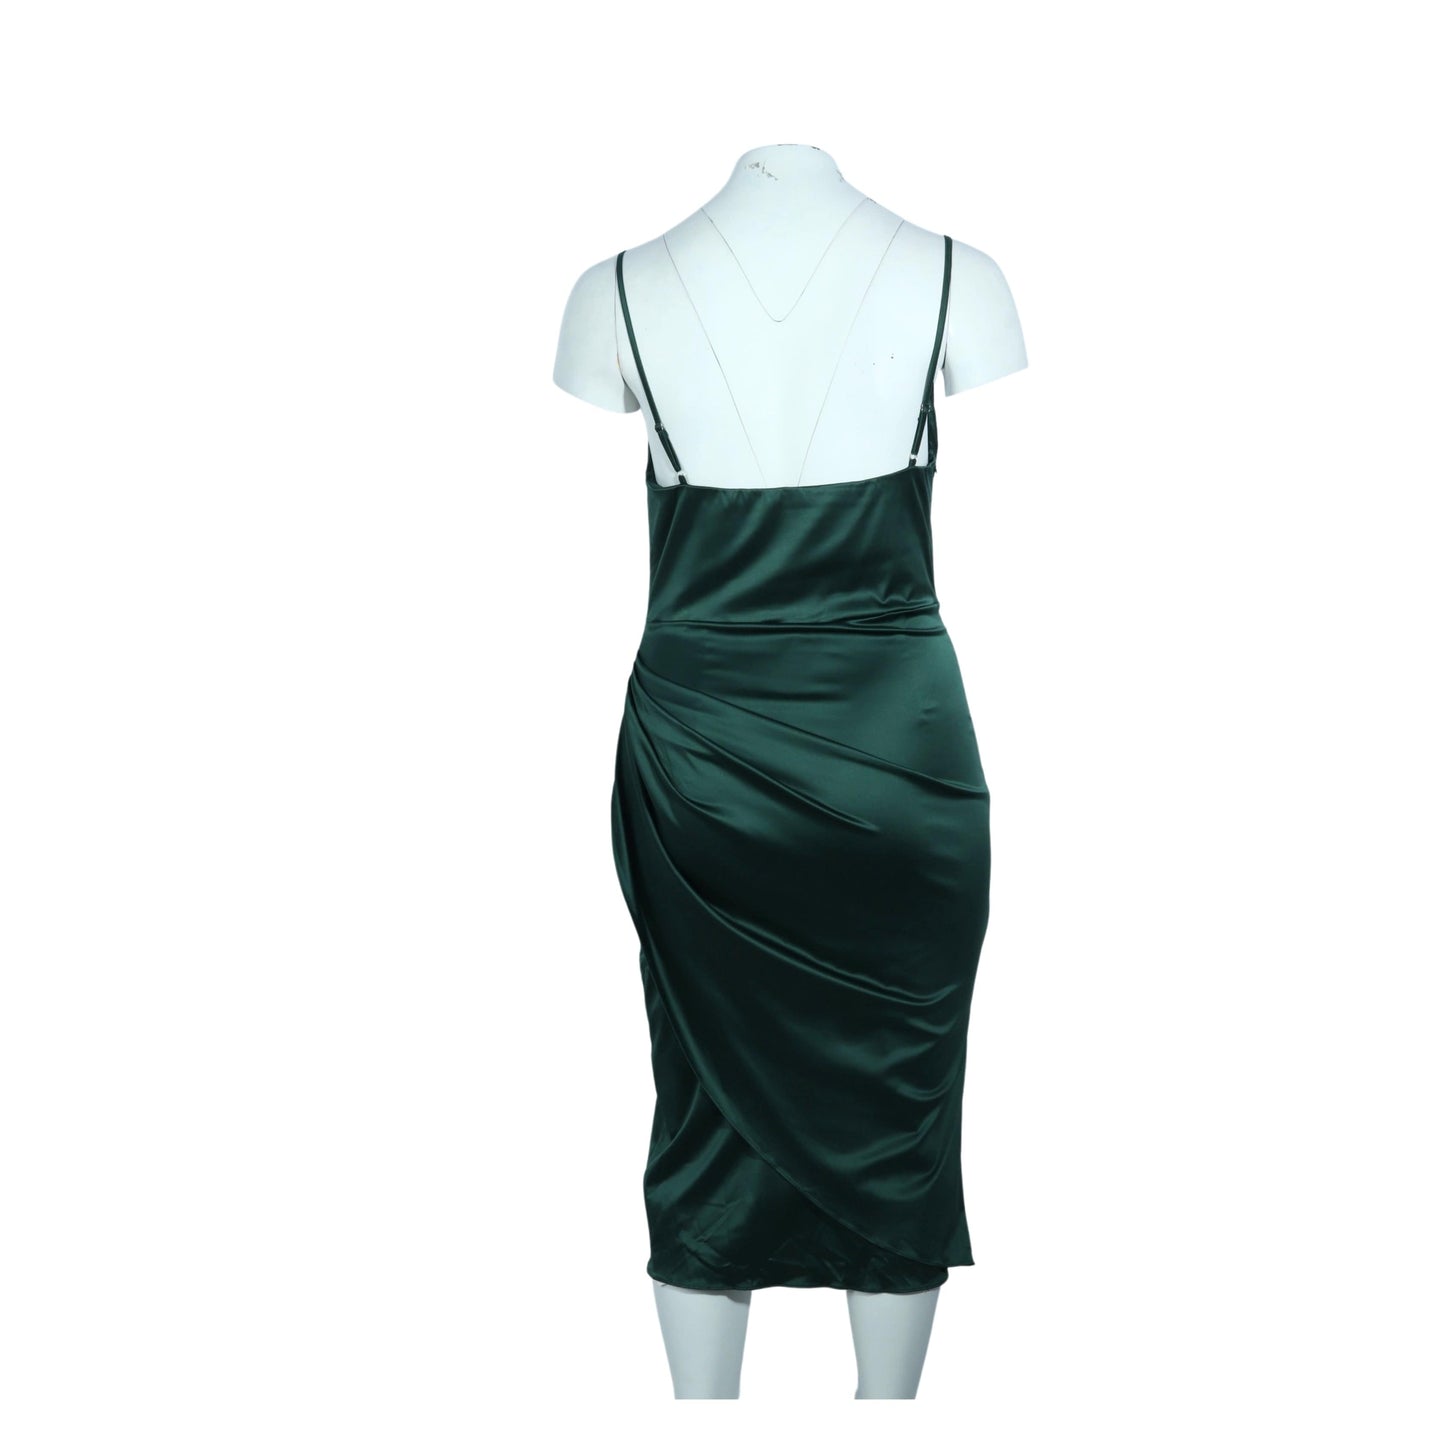 HTZMO Womens Dress XXL / Green HTZMO - Square Neck Rushed Dress